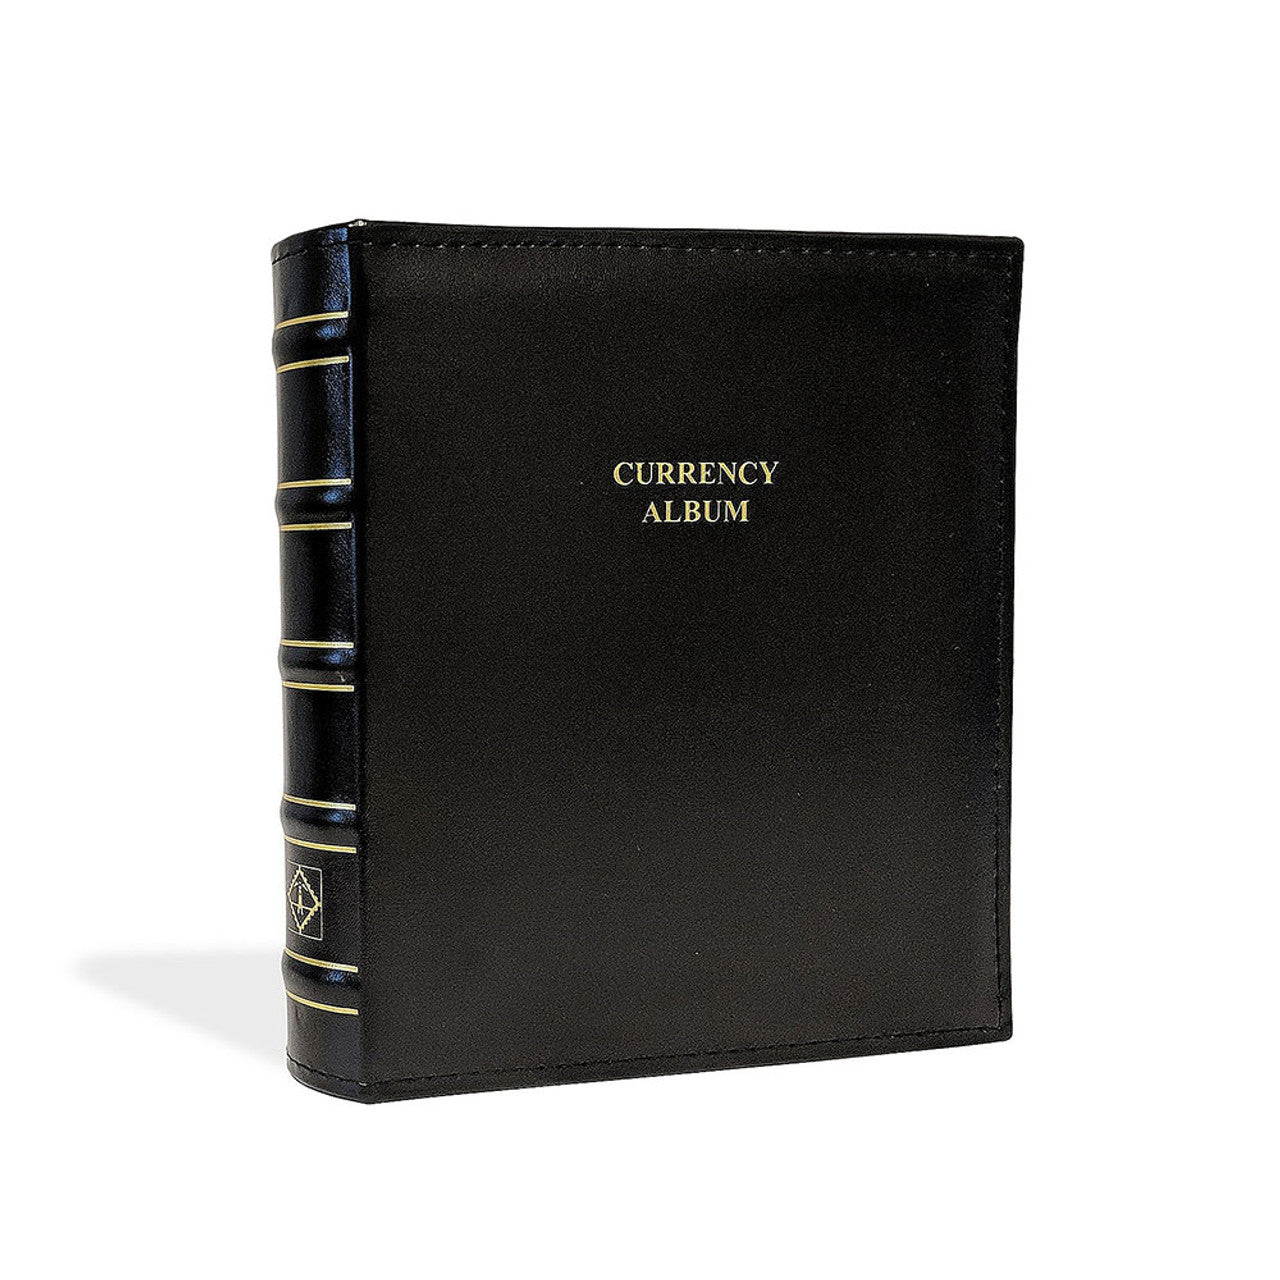 Graded Currency Album 4-Ring Binder for Graded Banknotes